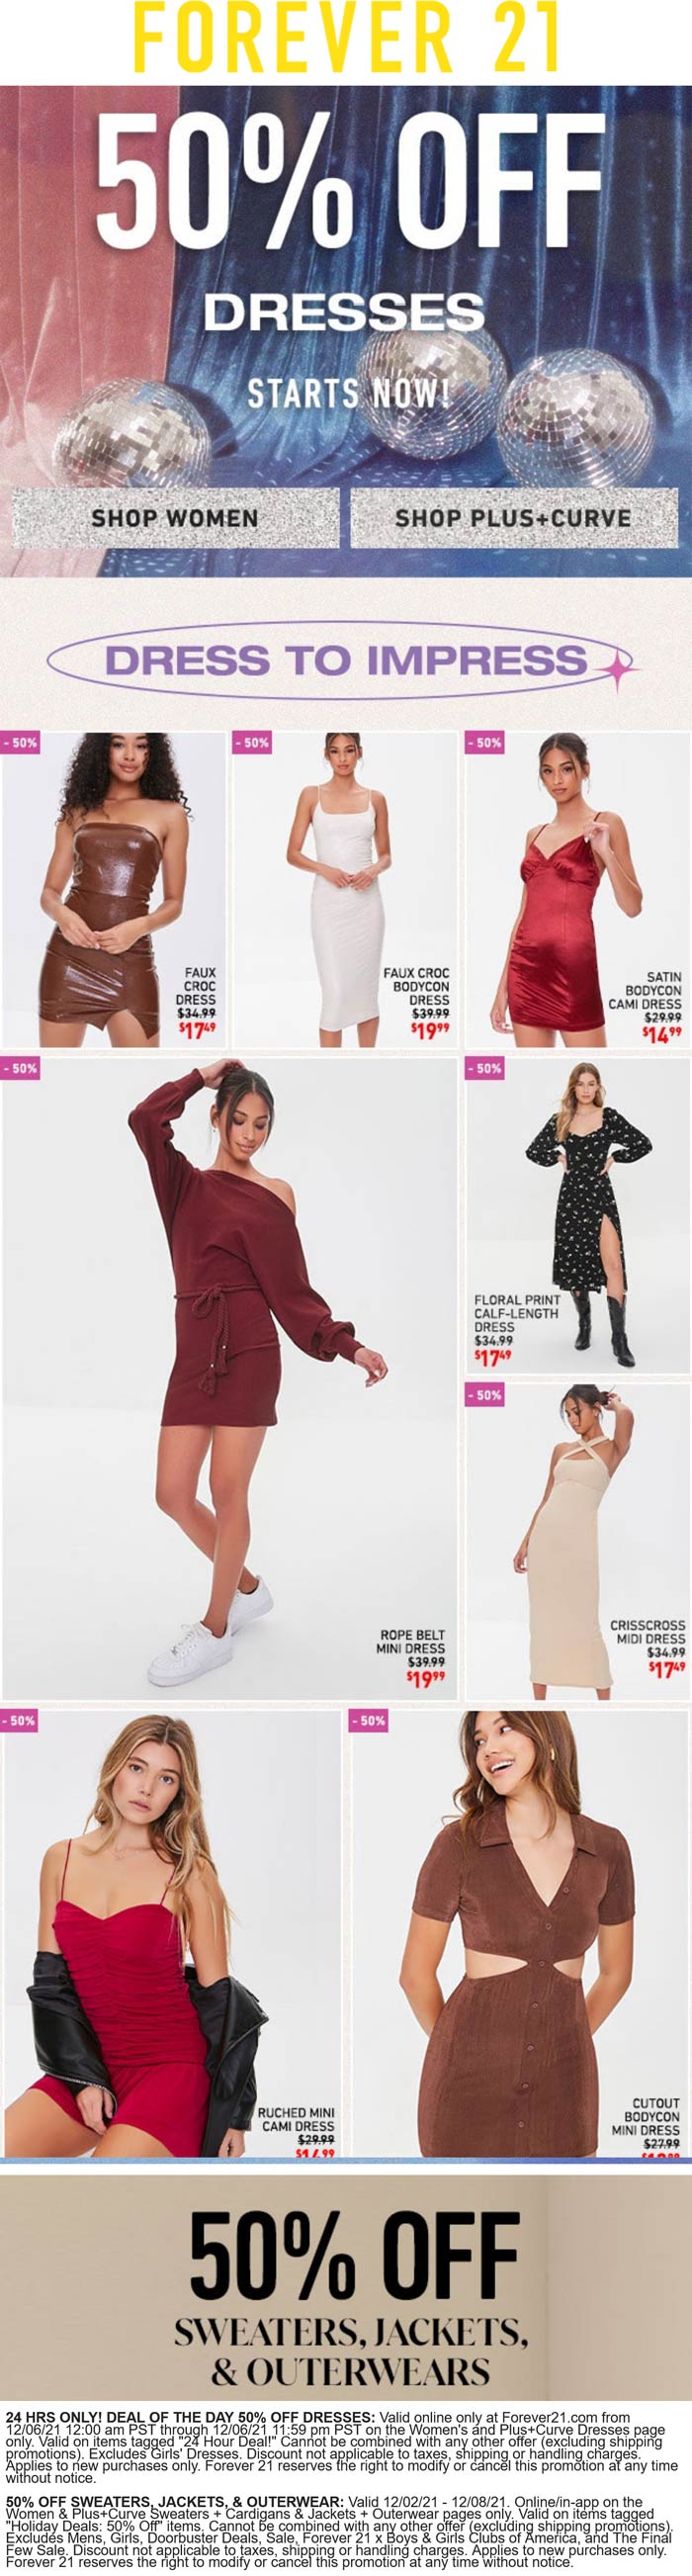 Forever 21 stores Coupon  50% off dresses & outerwear online today at Forever 21 #forever21 